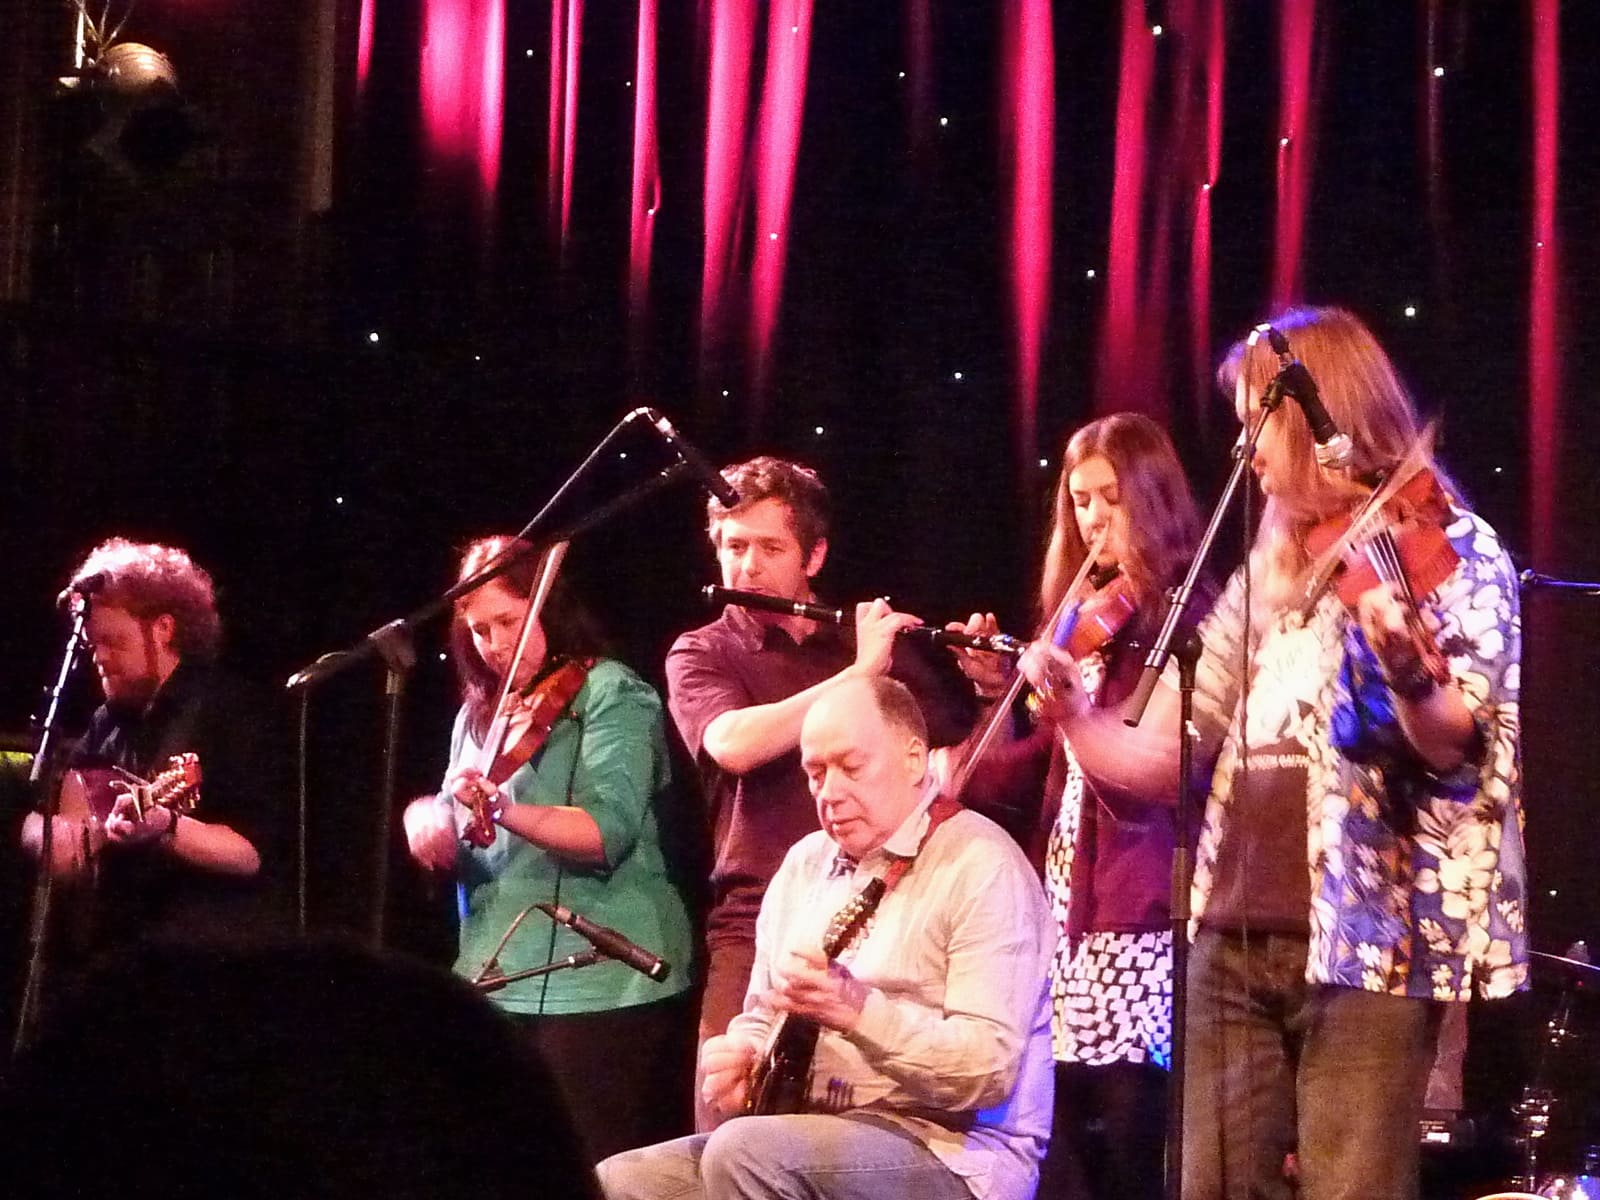 A group of musicians play fiddles on stage